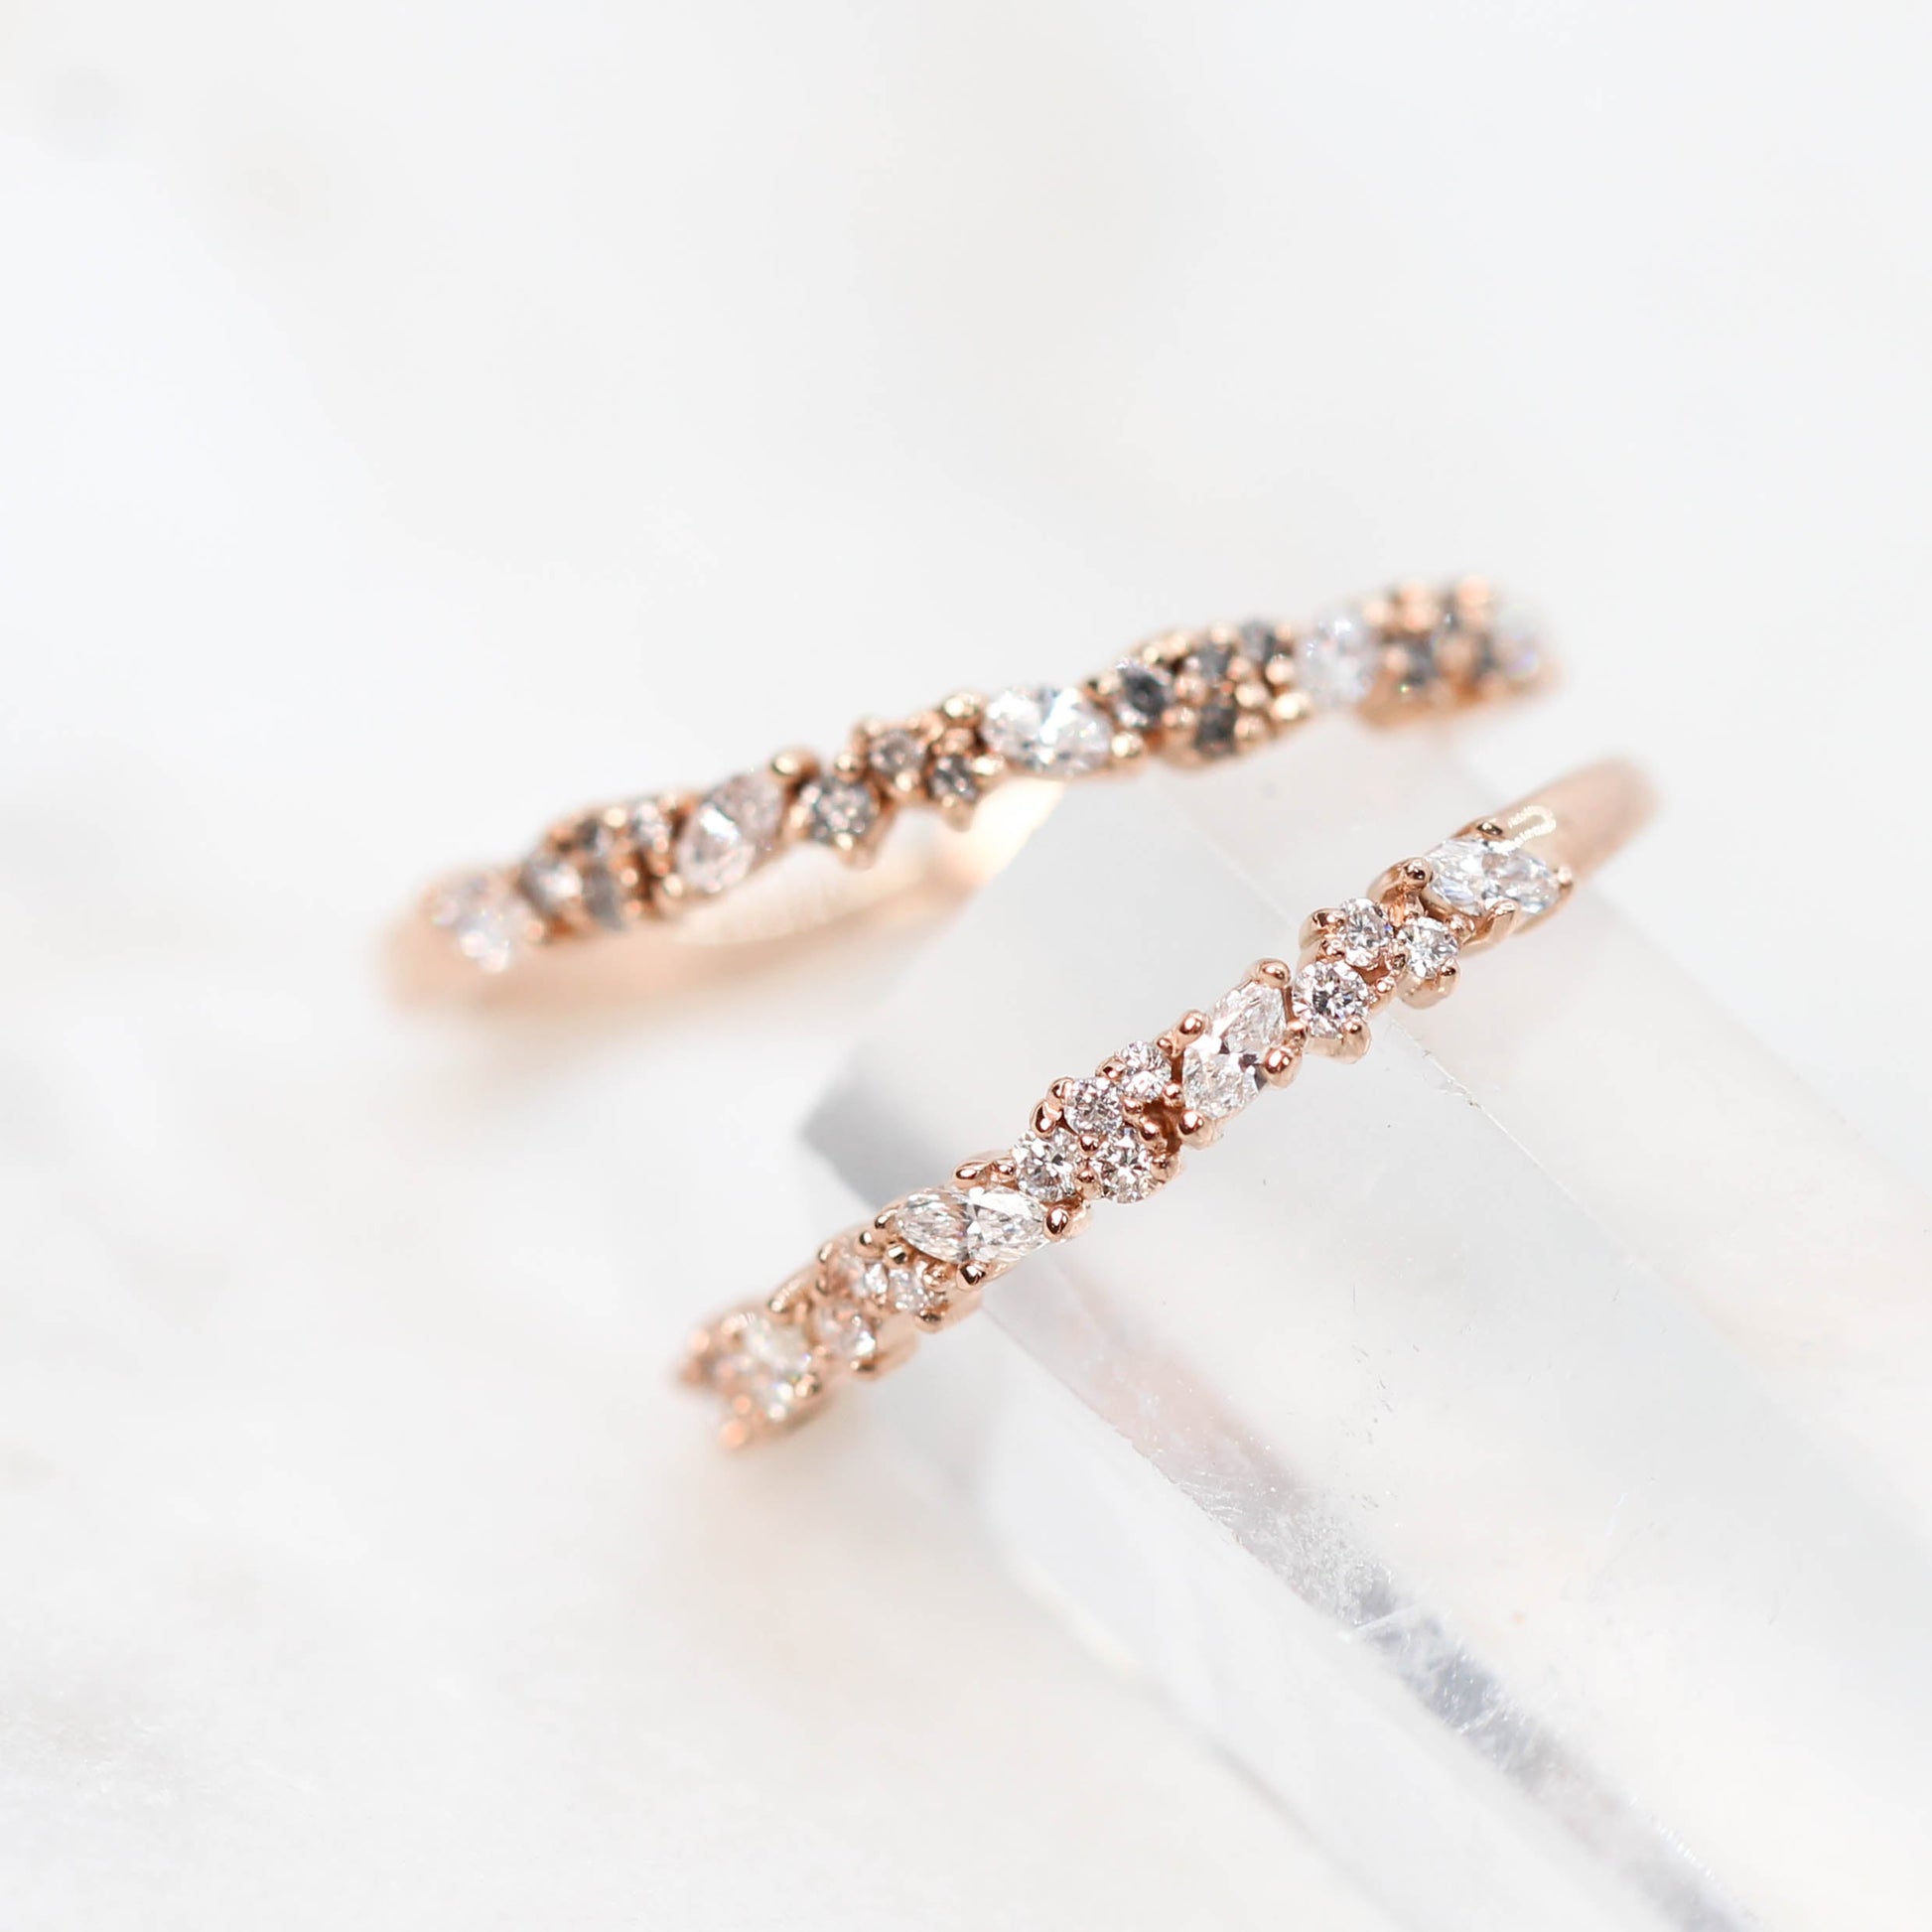 Gennie - Stackable Engagement Ring Band in Your Choice of Gold - Midwinter Co. Alternative Bridal Rings and Modern Fine Jewelry